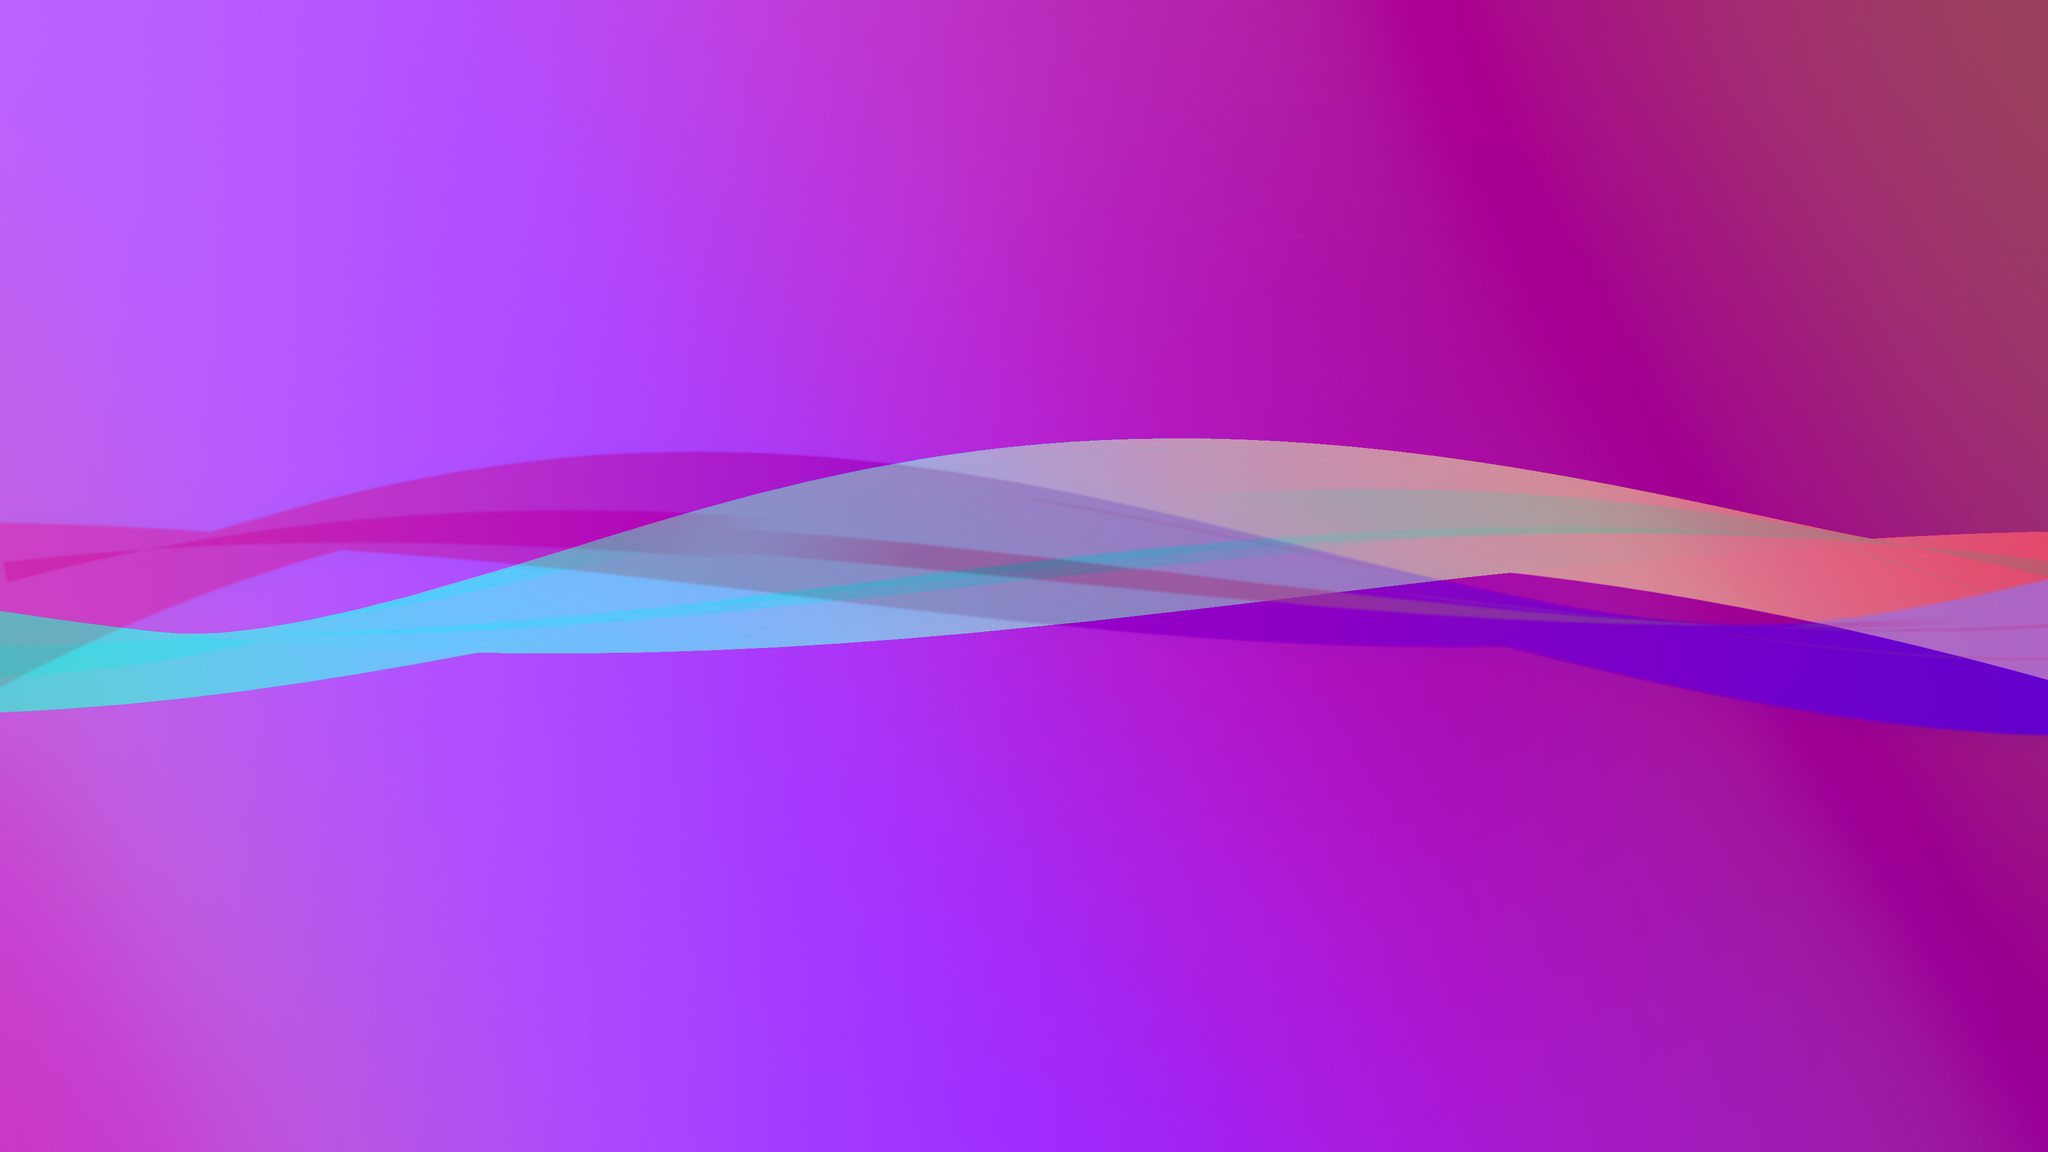 Oval Gradient Shapes 8K Wallpapers